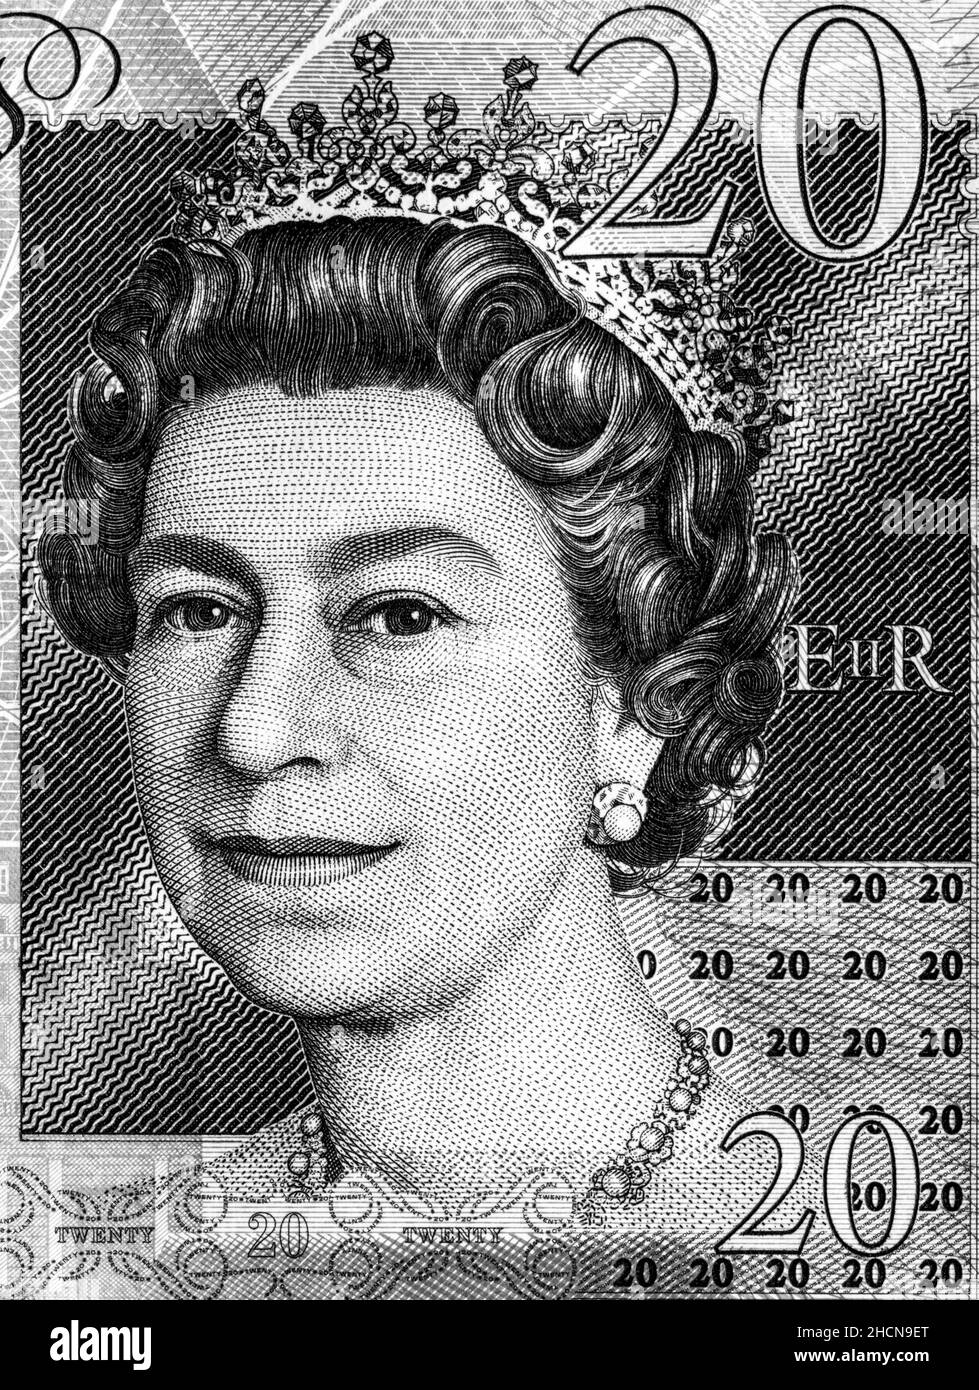 Black and white Queen Elizabeth II portrait from England pound banknotes Stock Photo